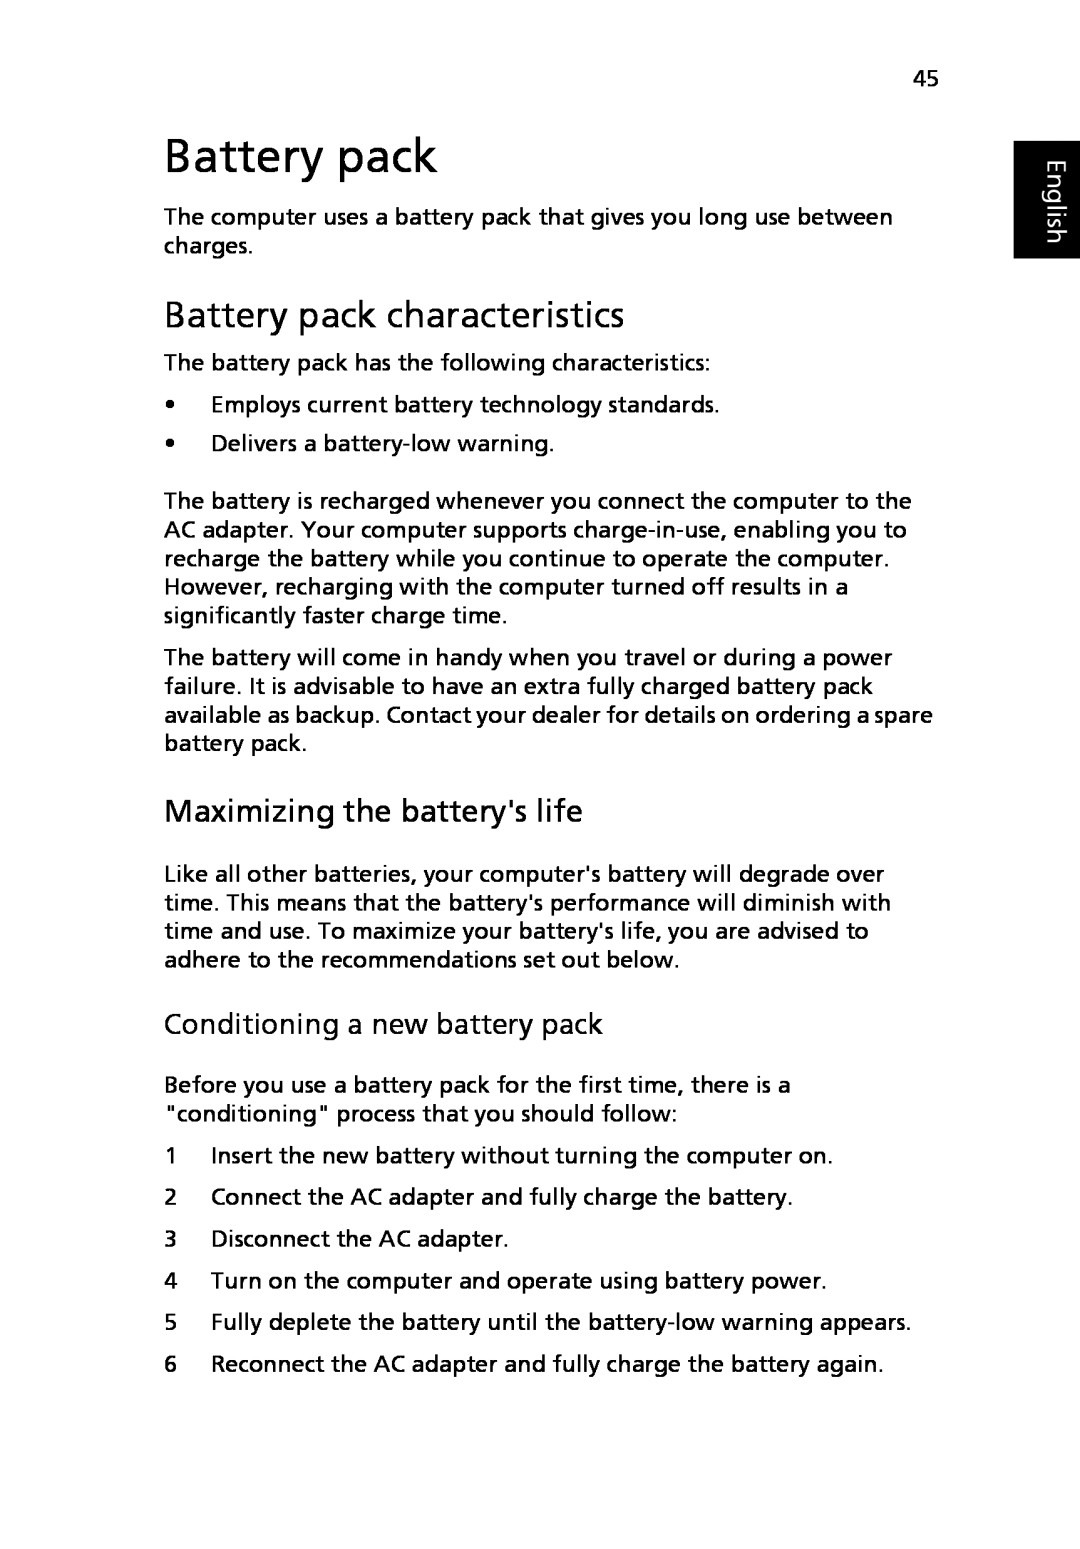 Acer 5010 Series Battery pack characteristics, Maximizing the batterys life, Conditioning a new battery pack, English 